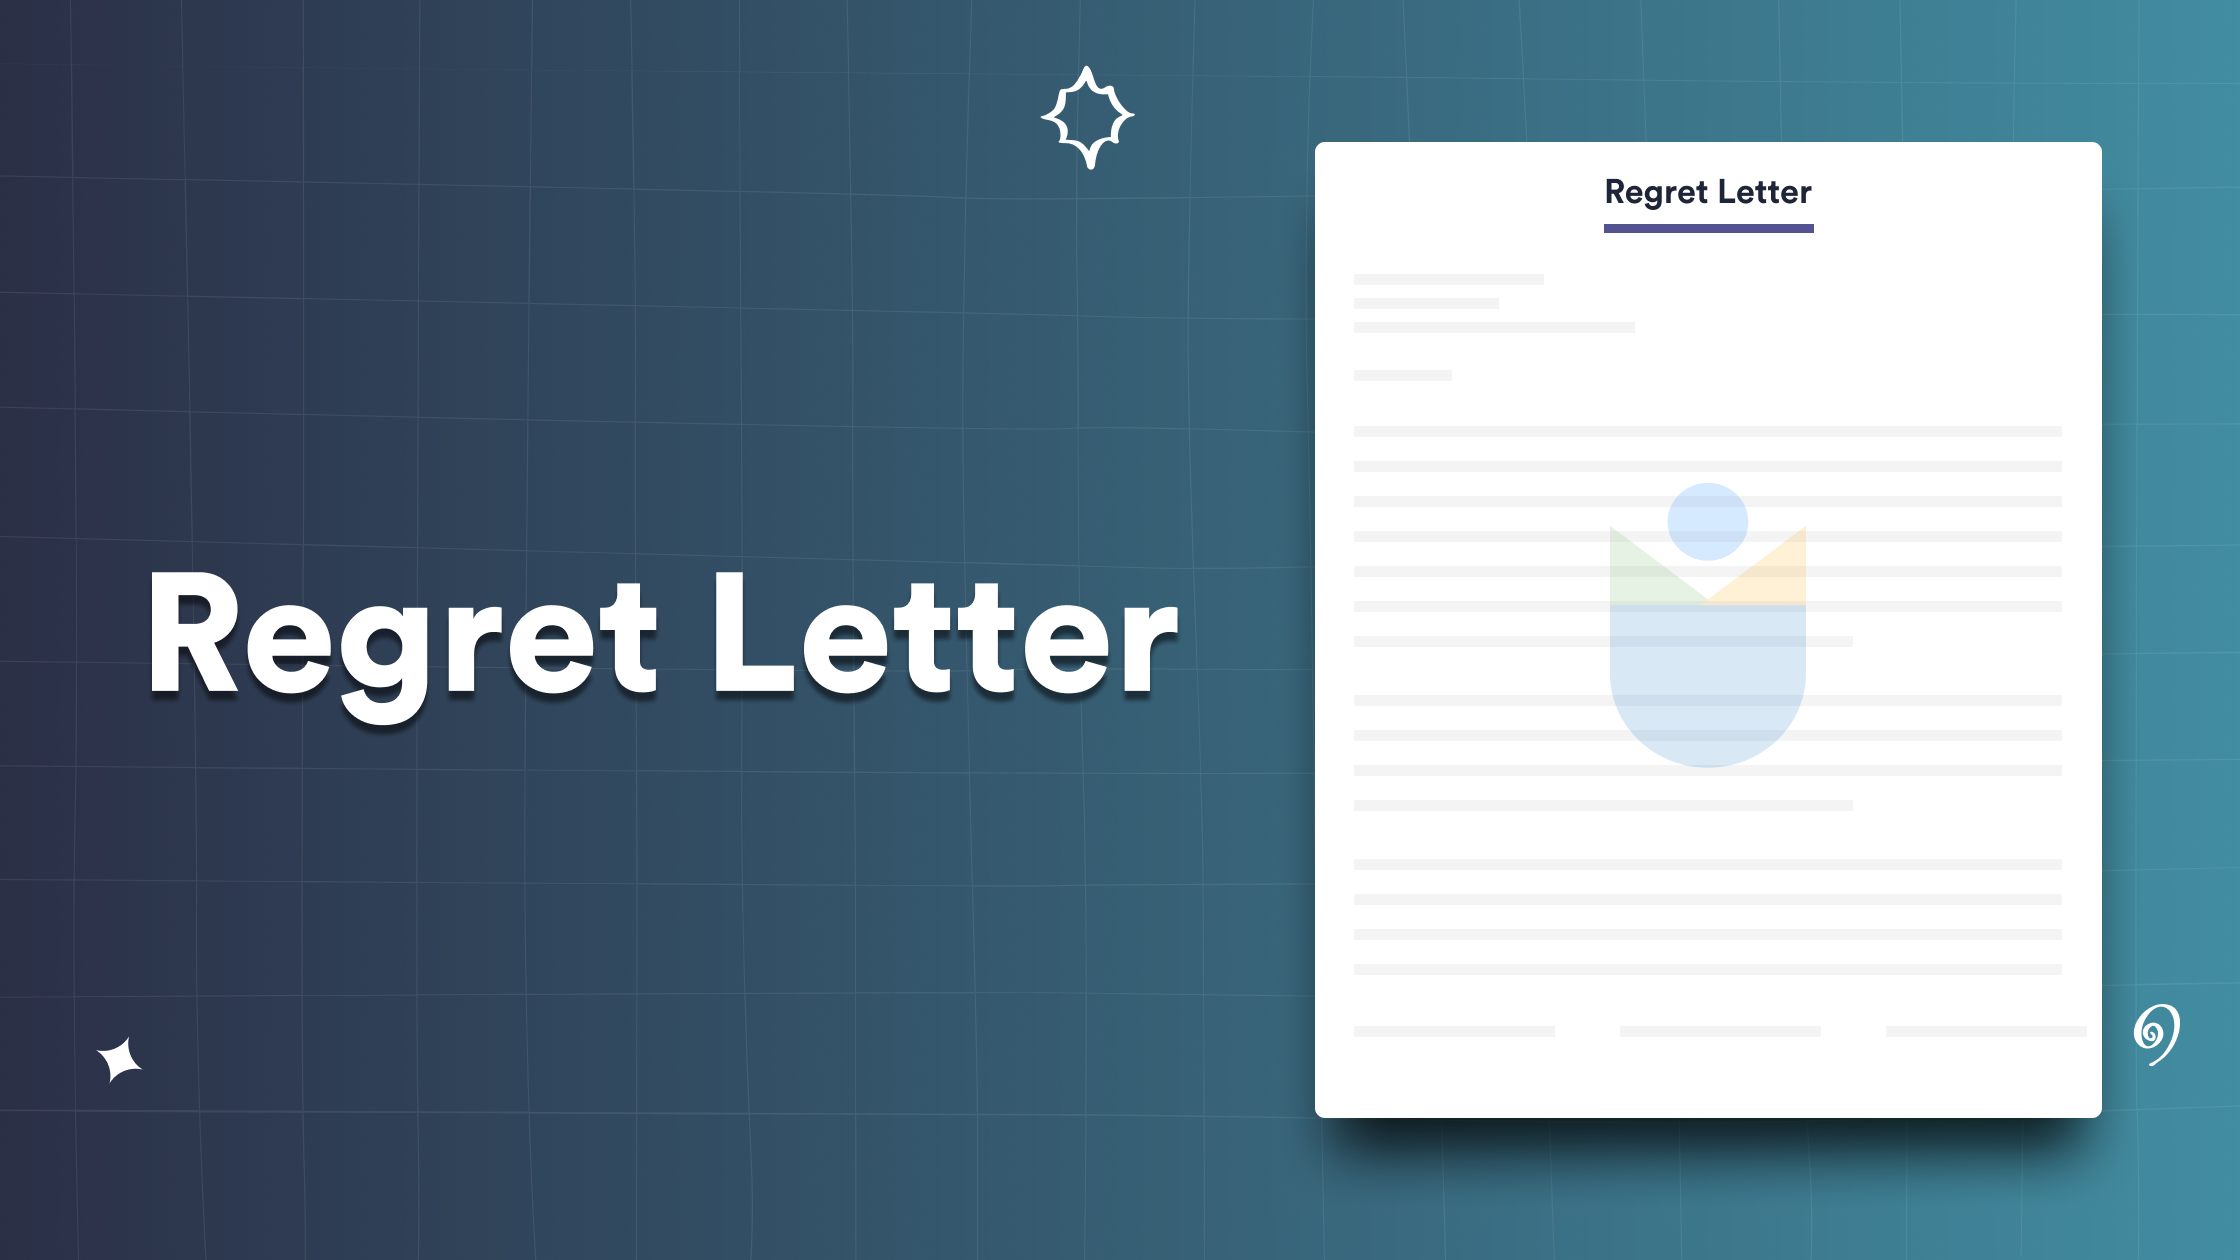 Regret Letter - Format, Writing Tips, Templates, Examples, and More